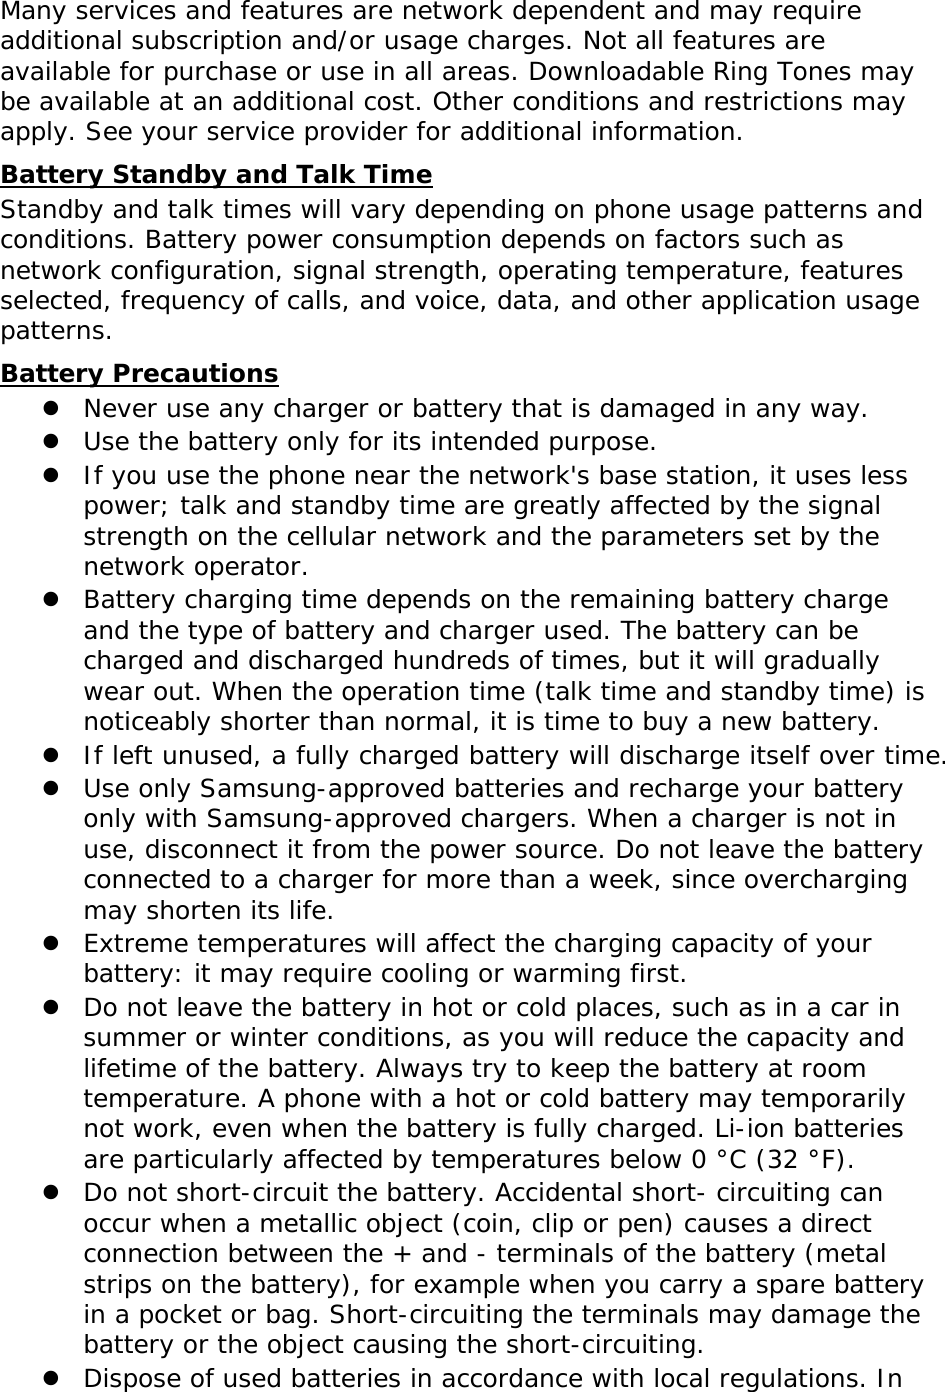 Many services and features are network dependent and may require additional subscription and/or usage charges. Not all features are available for purchase or use in all areas. Downloadable Ring Tones may be available at an additional cost. Other conditions and restrictions may apply. See your service provider for additional information. Battery Standby and Talk Time Standby and talk times will vary depending on phone usage patterns and conditions. Battery power consumption depends on factors such as network configuration, signal strength, operating temperature, features selected, frequency of calls, and voice, data, and other application usage patterns.  Battery Precautions  Never use any charger or battery that is damaged in any way.  Use the battery only for its intended purpose.  If you use the phone near the network&apos;s base station, it uses less power; talk and standby time are greatly affected by the signal strength on the cellular network and the parameters set by the network operator.  Battery charging time depends on the remaining battery charge and the type of battery and charger used. The battery can be charged and discharged hundreds of times, but it will gradually wear out. When the operation time (talk time and standby time) is noticeably shorter than normal, it is time to buy a new battery.  If left unused, a fully charged battery will discharge itself over time.  Use only Samsung-approved batteries and recharge your battery only with Samsung-approved chargers. When a charger is not in use, disconnect it from the power source. Do not leave the battery connected to a charger for more than a week, since overcharging may shorten its life.  Extreme temperatures will affect the charging capacity of your battery: it may require cooling or warming first.  Do not leave the battery in hot or cold places, such as in a car in summer or winter conditions, as you will reduce the capacity and lifetime of the battery. Always try to keep the battery at room temperature. A phone with a hot or cold battery may temporarily not work, even when the battery is fully charged. Li-ion batteries are particularly affected by temperatures below 0 °C (32 °F).  Do not short-circuit the battery. Accidental short- circuiting can occur when a metallic object (coin, clip or pen) causes a direct connection between the + and - terminals of the battery (metal strips on the battery), for example when you carry a spare battery in a pocket or bag. Short-circuiting the terminals may damage the battery or the object causing the short-circuiting.  Dispose of used batteries in accordance with local regulations. In 